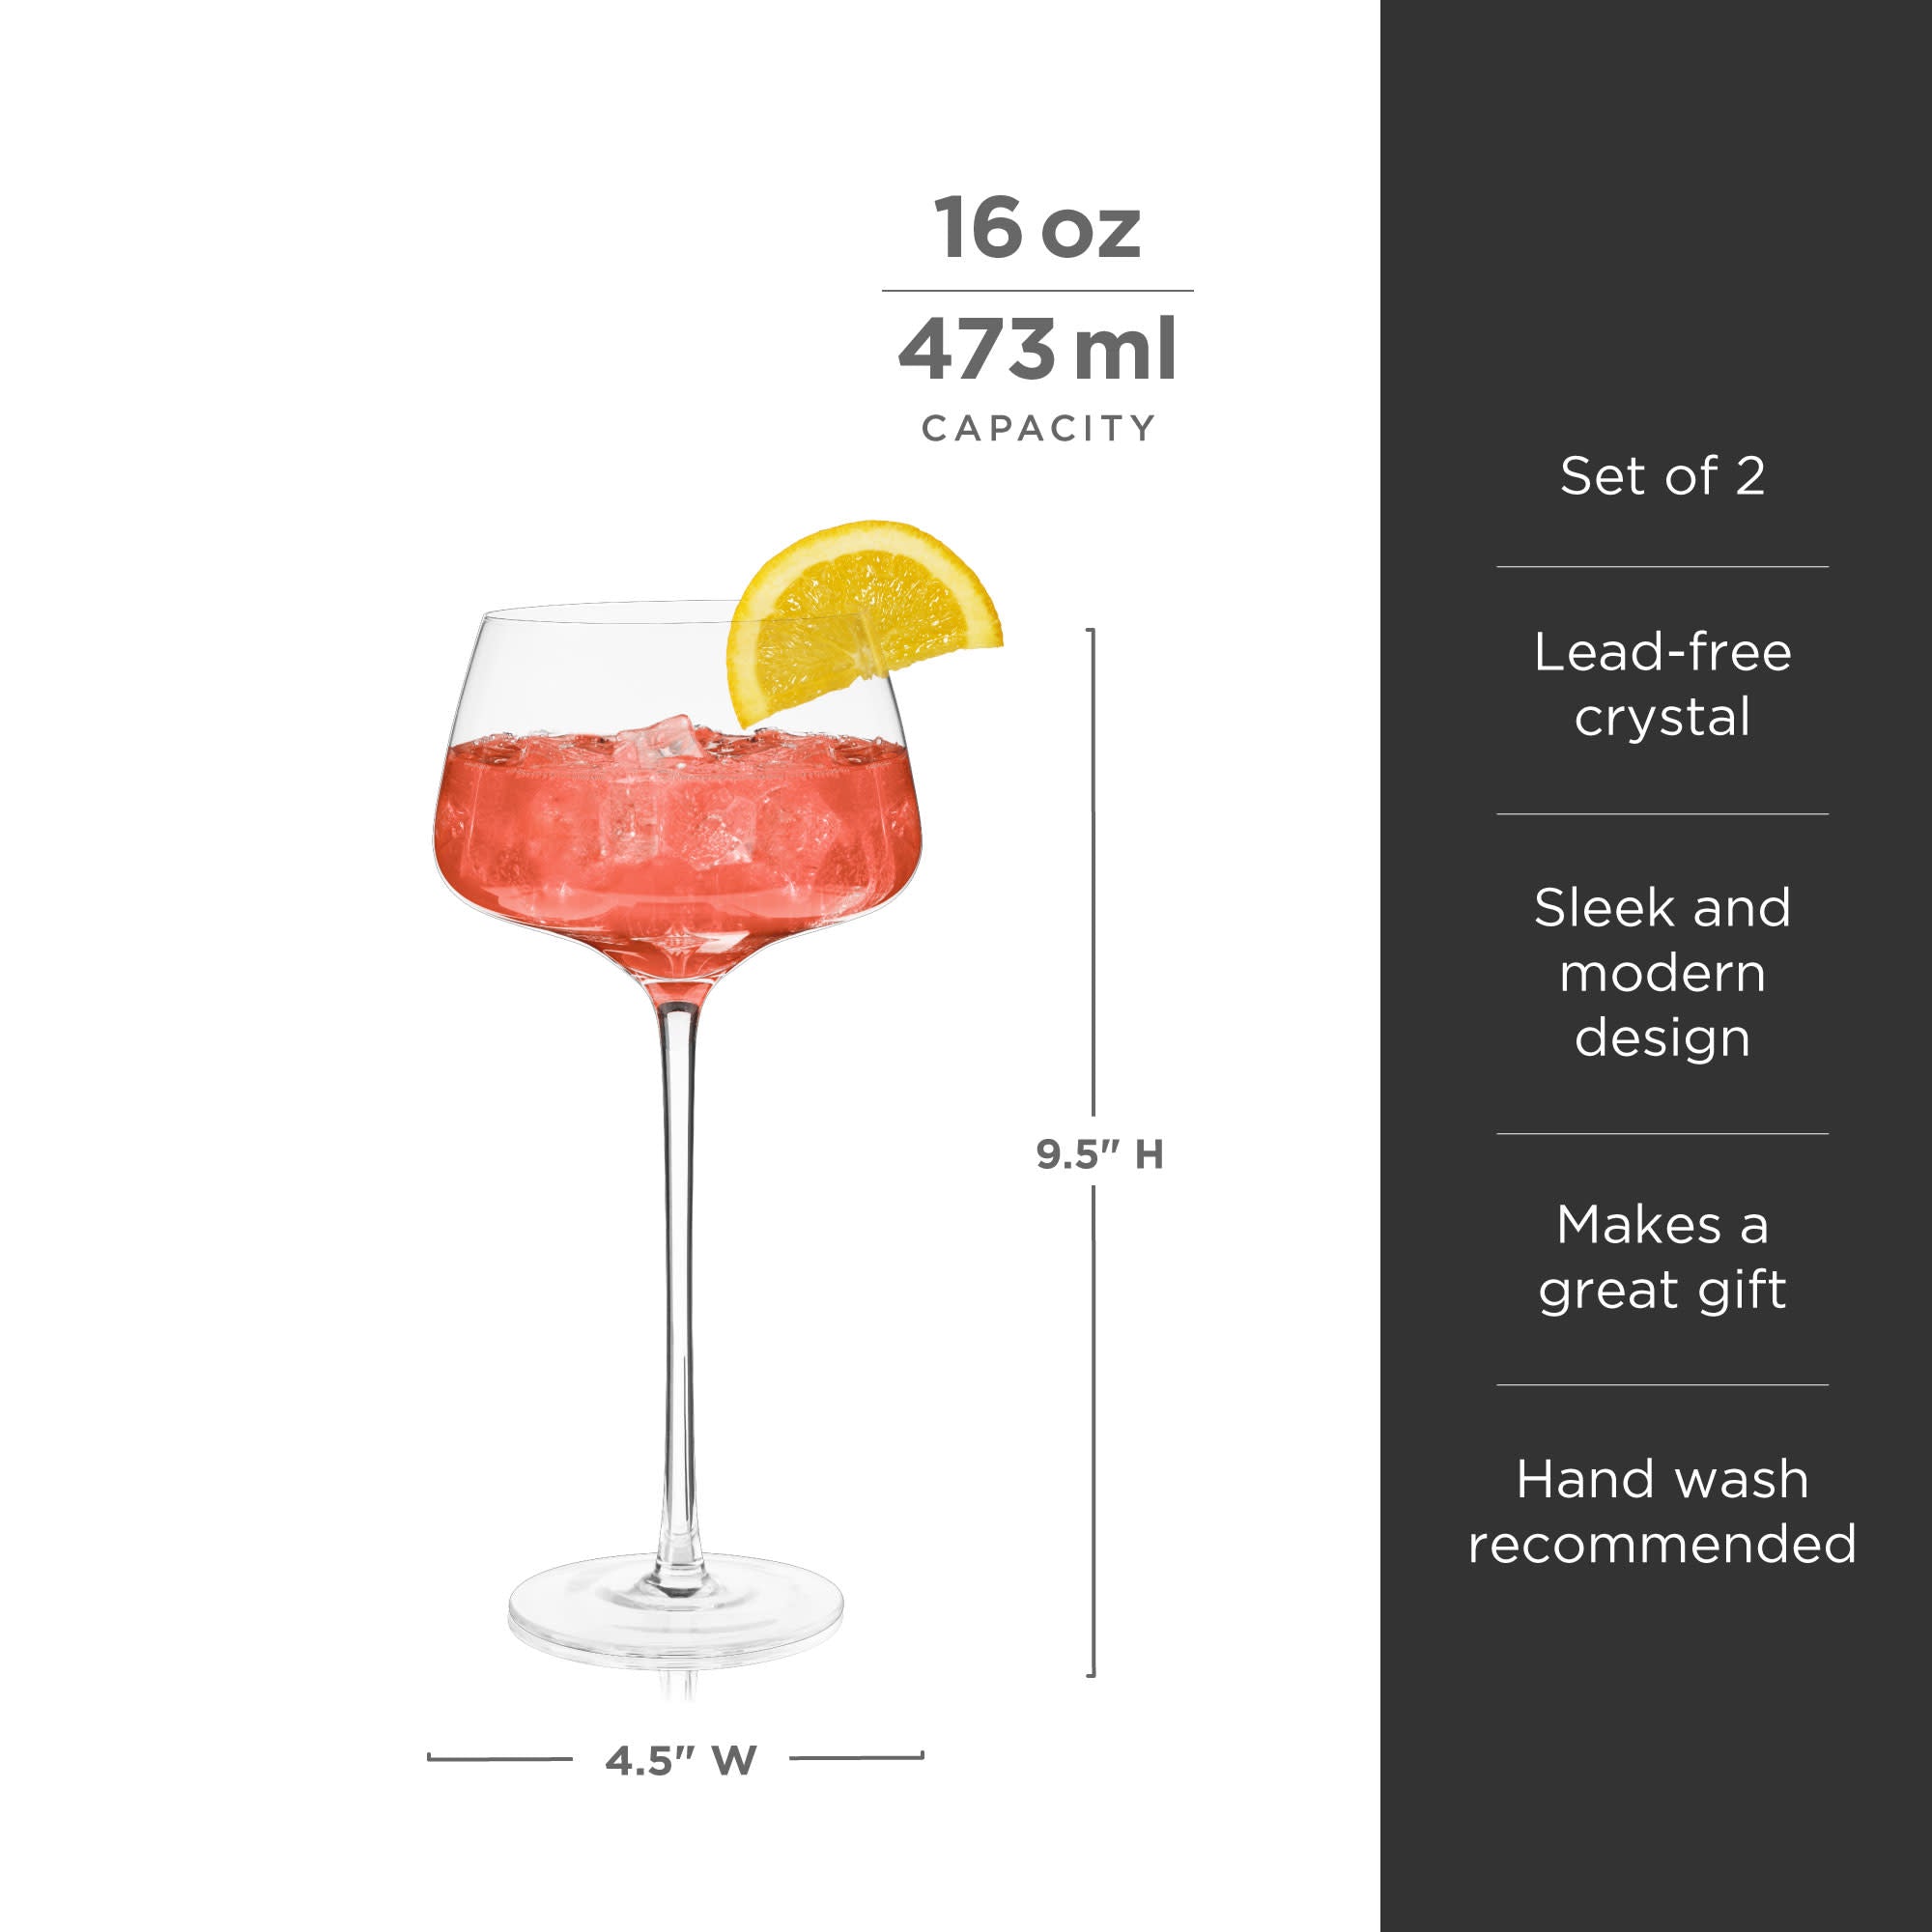 Aged & Ore's Duo Glasses Make Measuring Cocktail Ingredients a Breeze